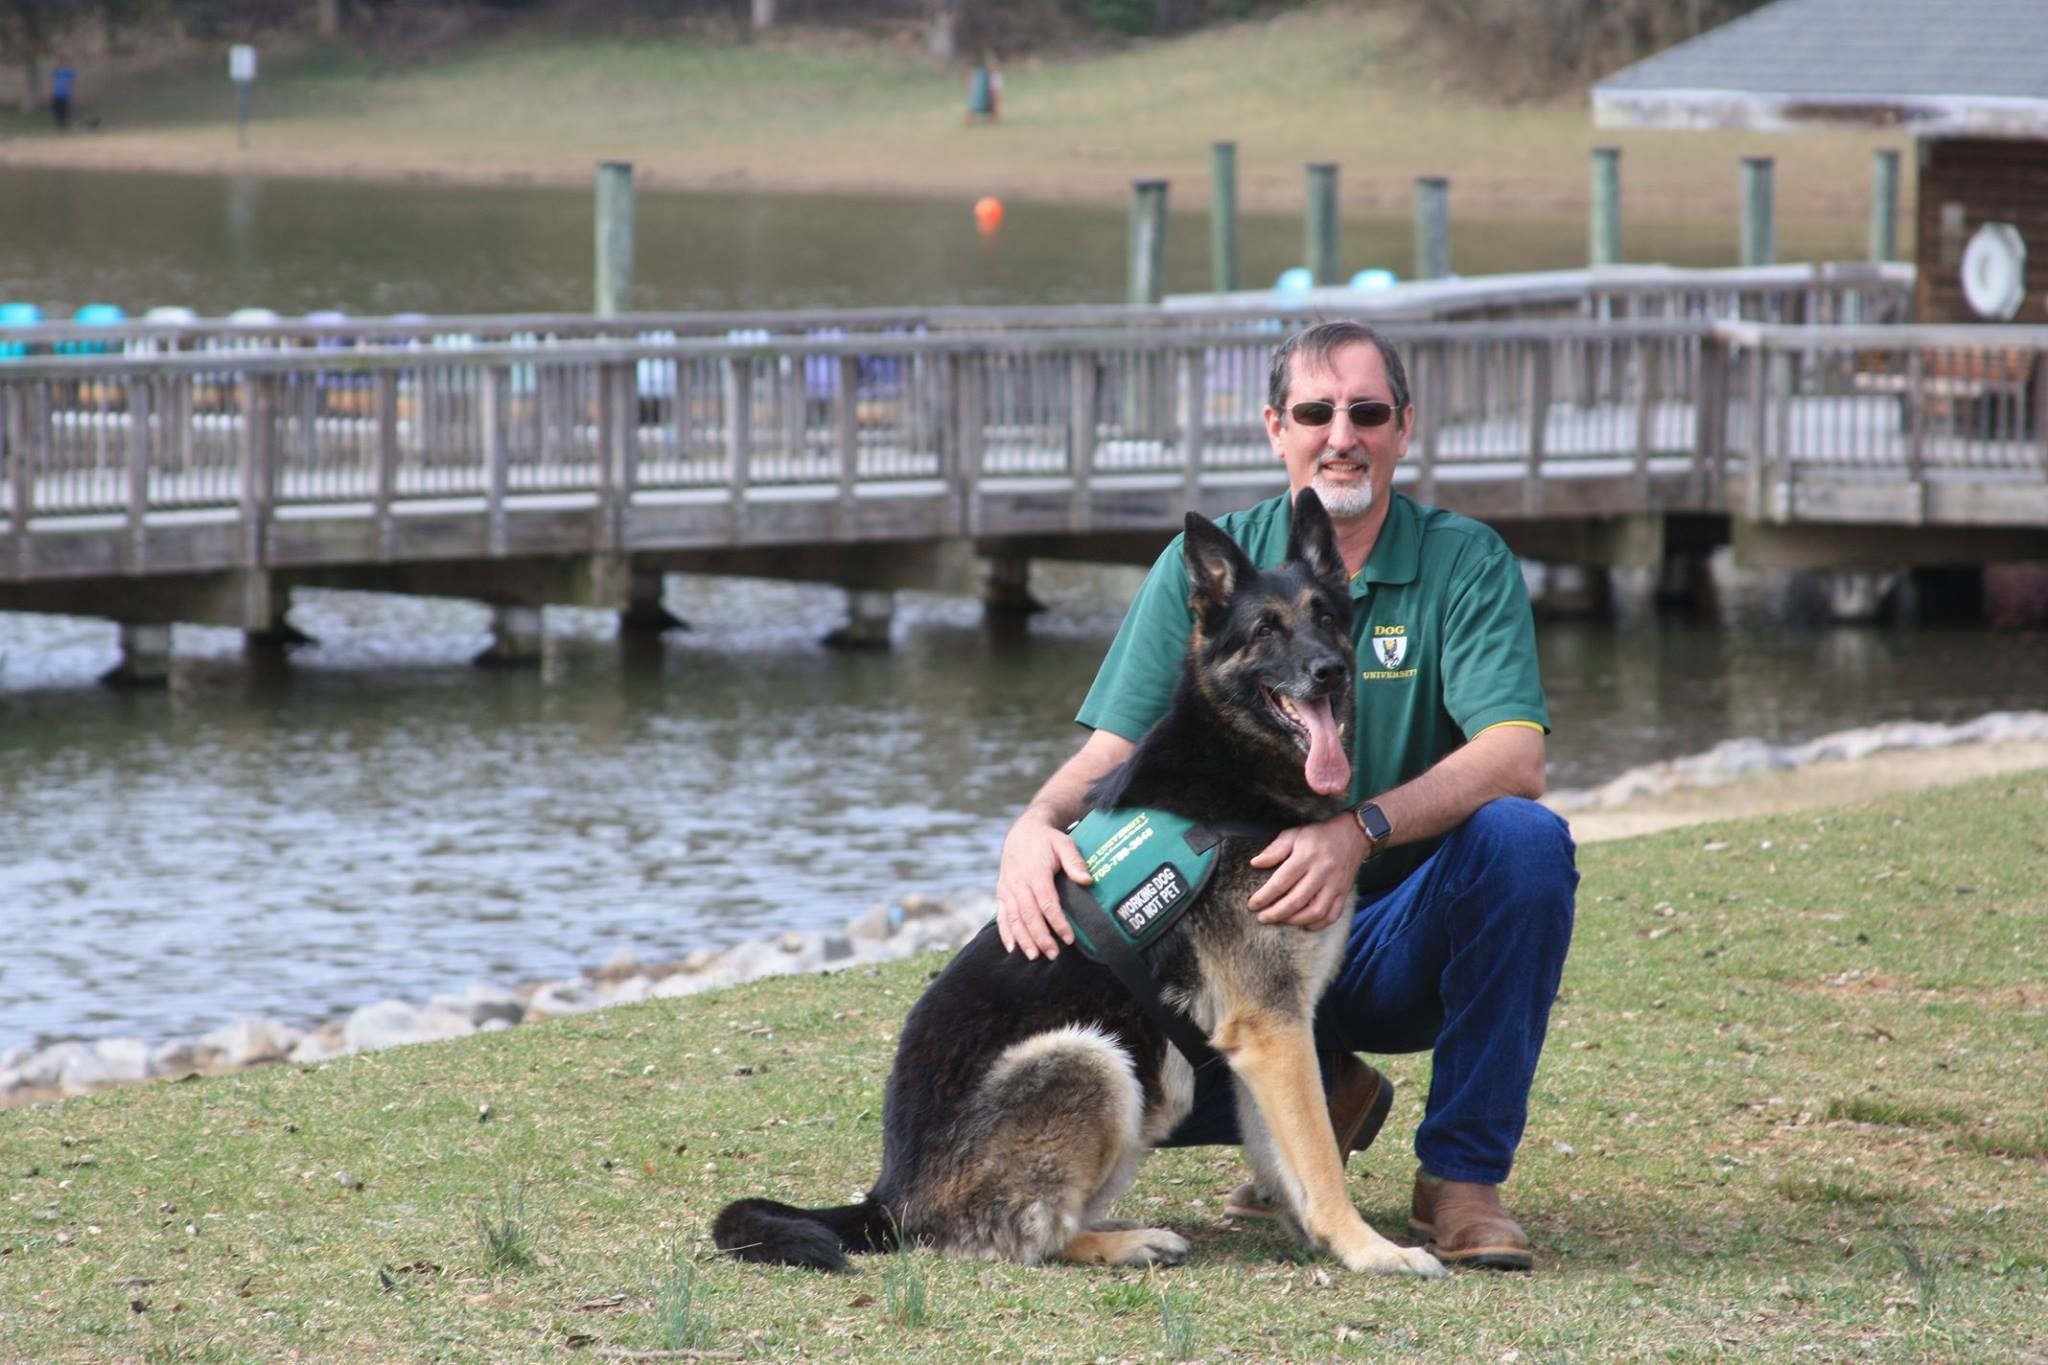 Dog trainer expert with his dog in Vienna, VA